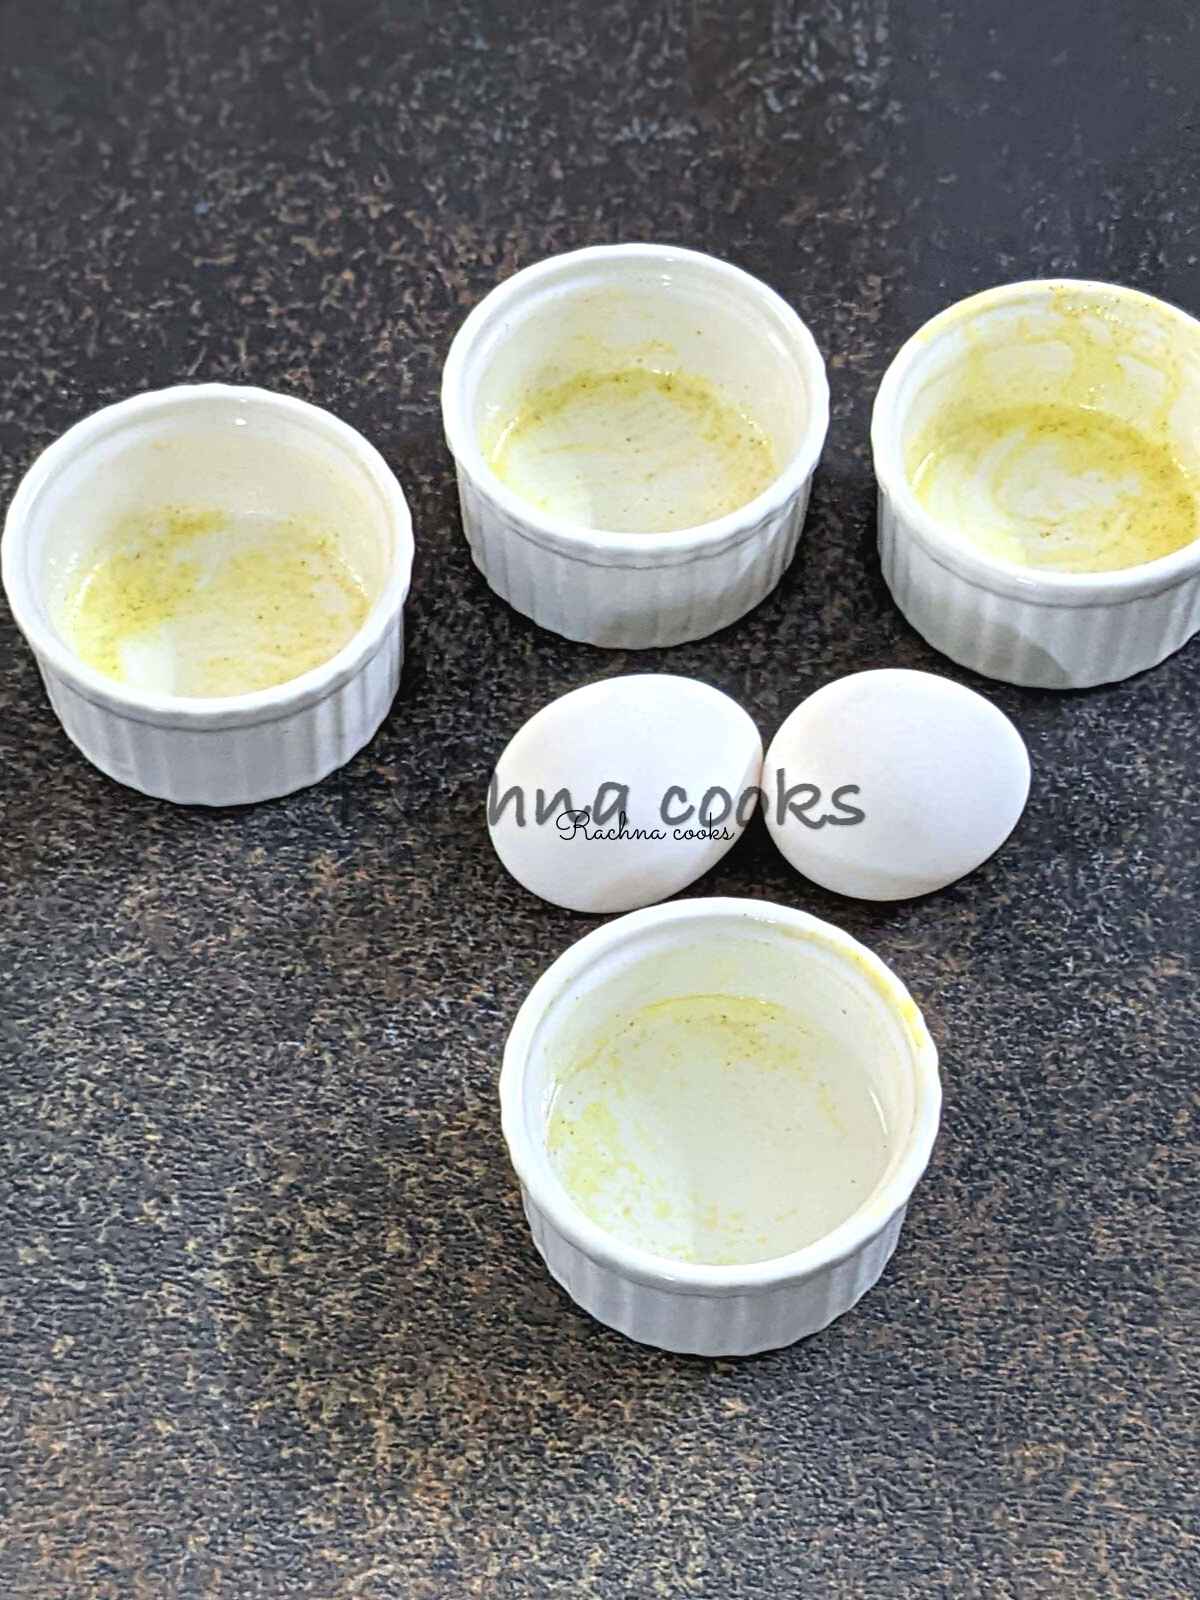 4 Ramekins brushed with oil along with 2 eggs